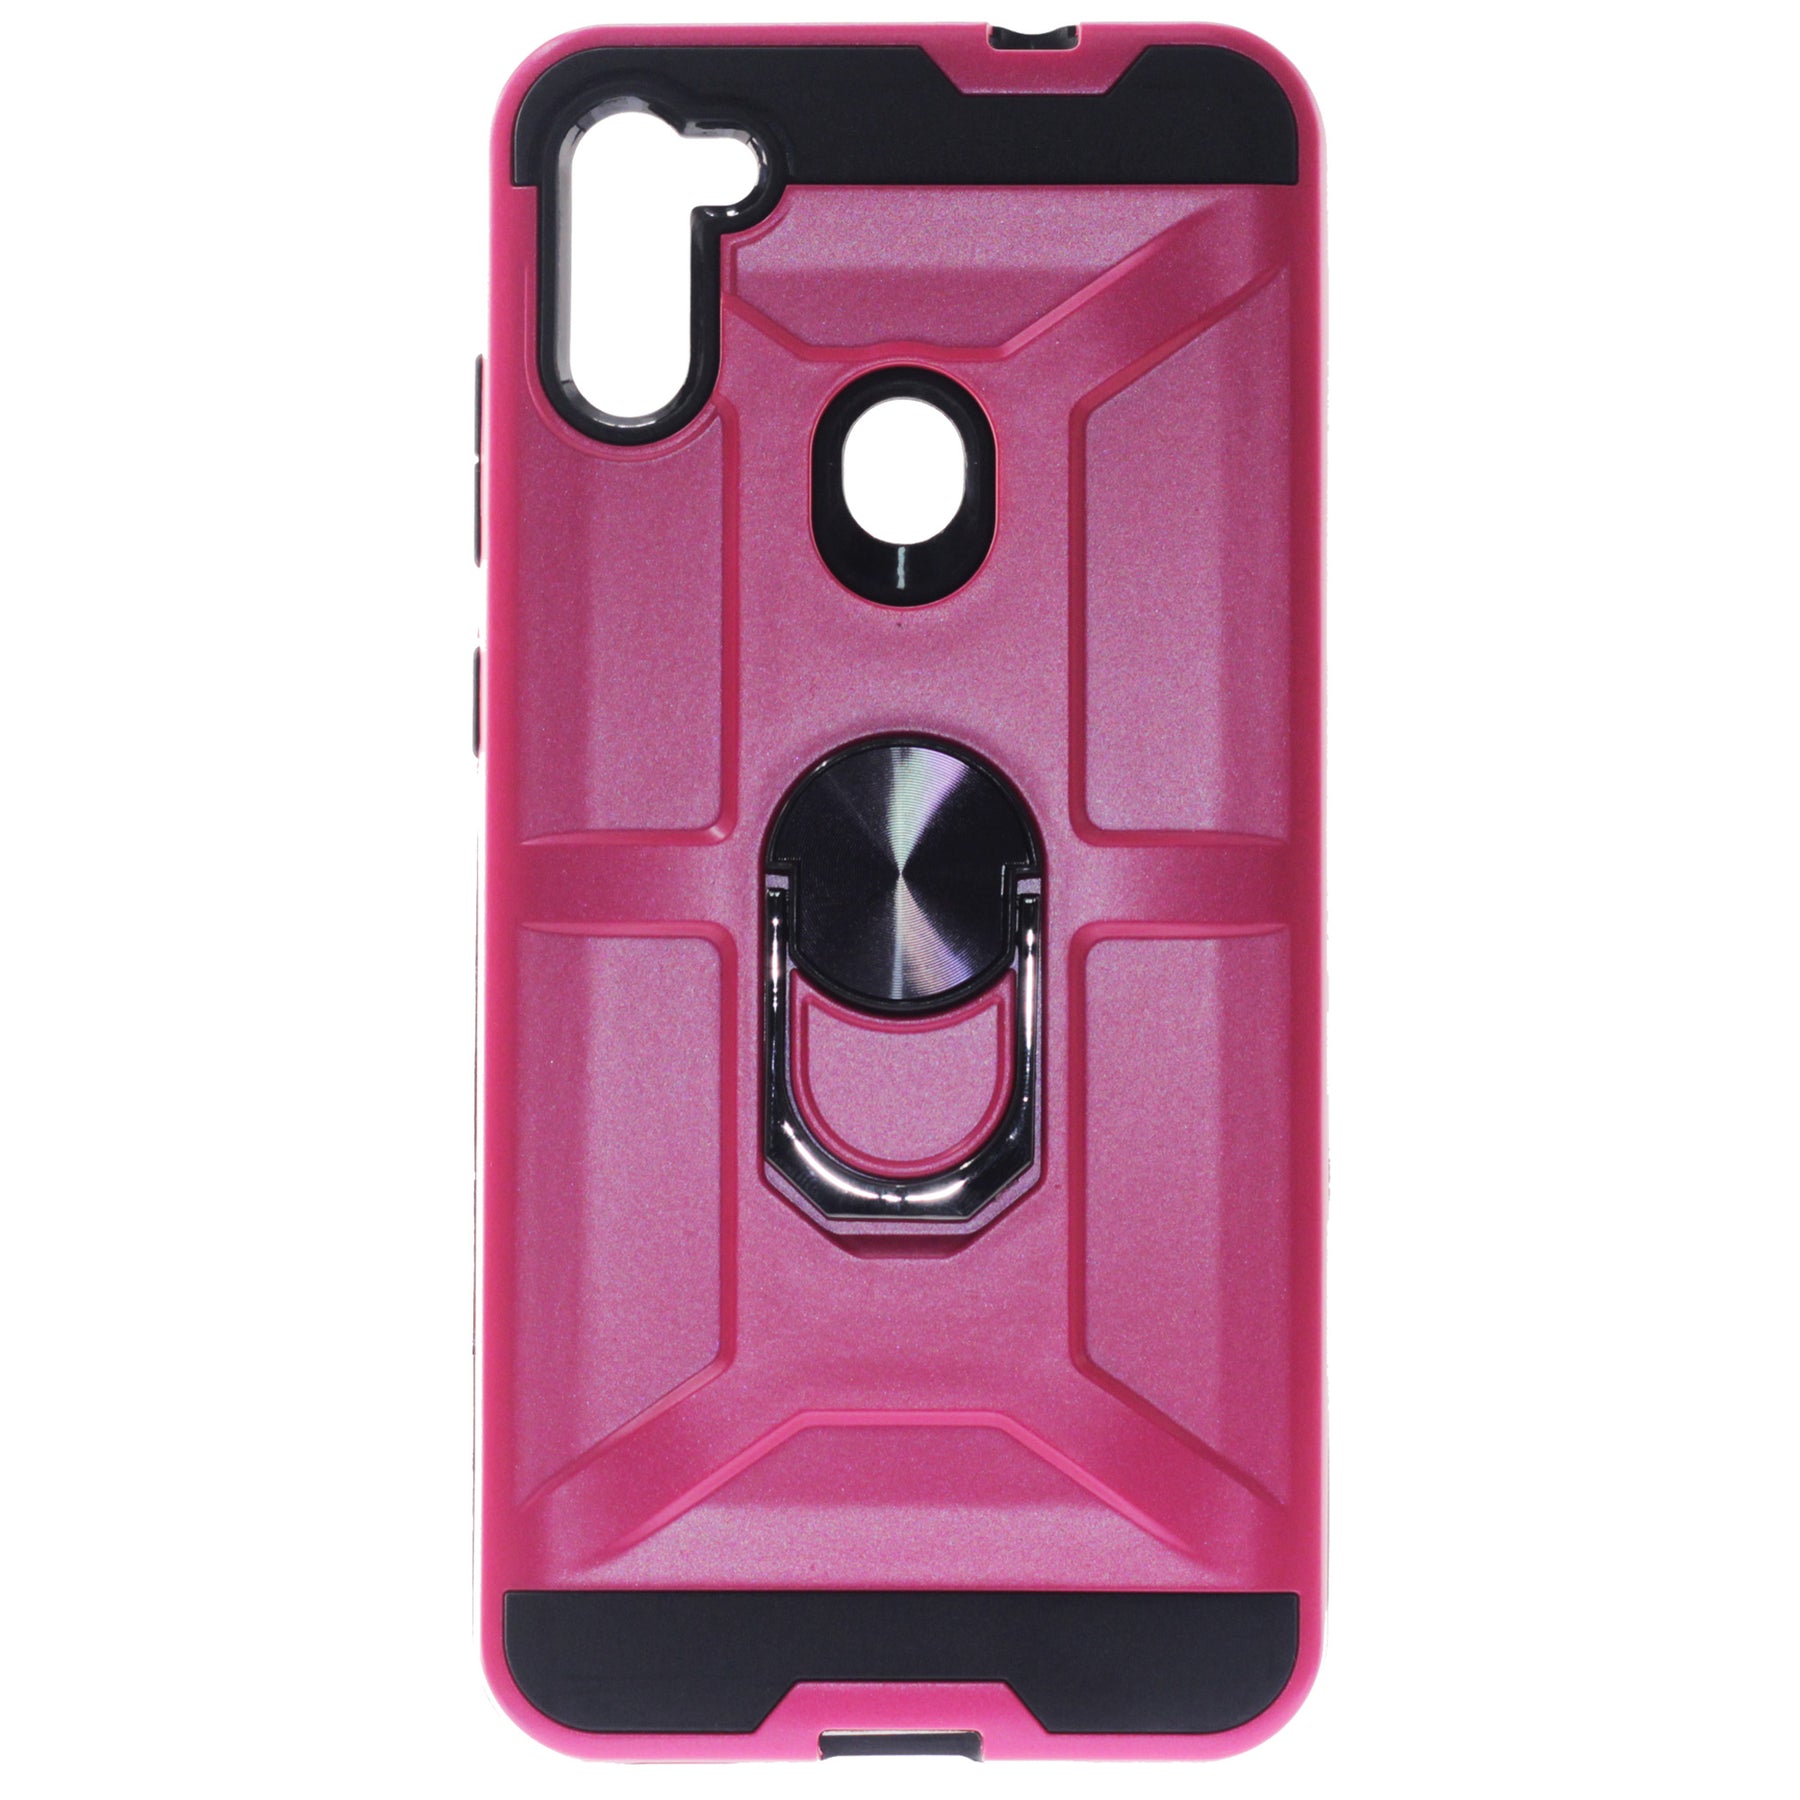 Samsung A11, Ring Armor Case, Color Pink/Red